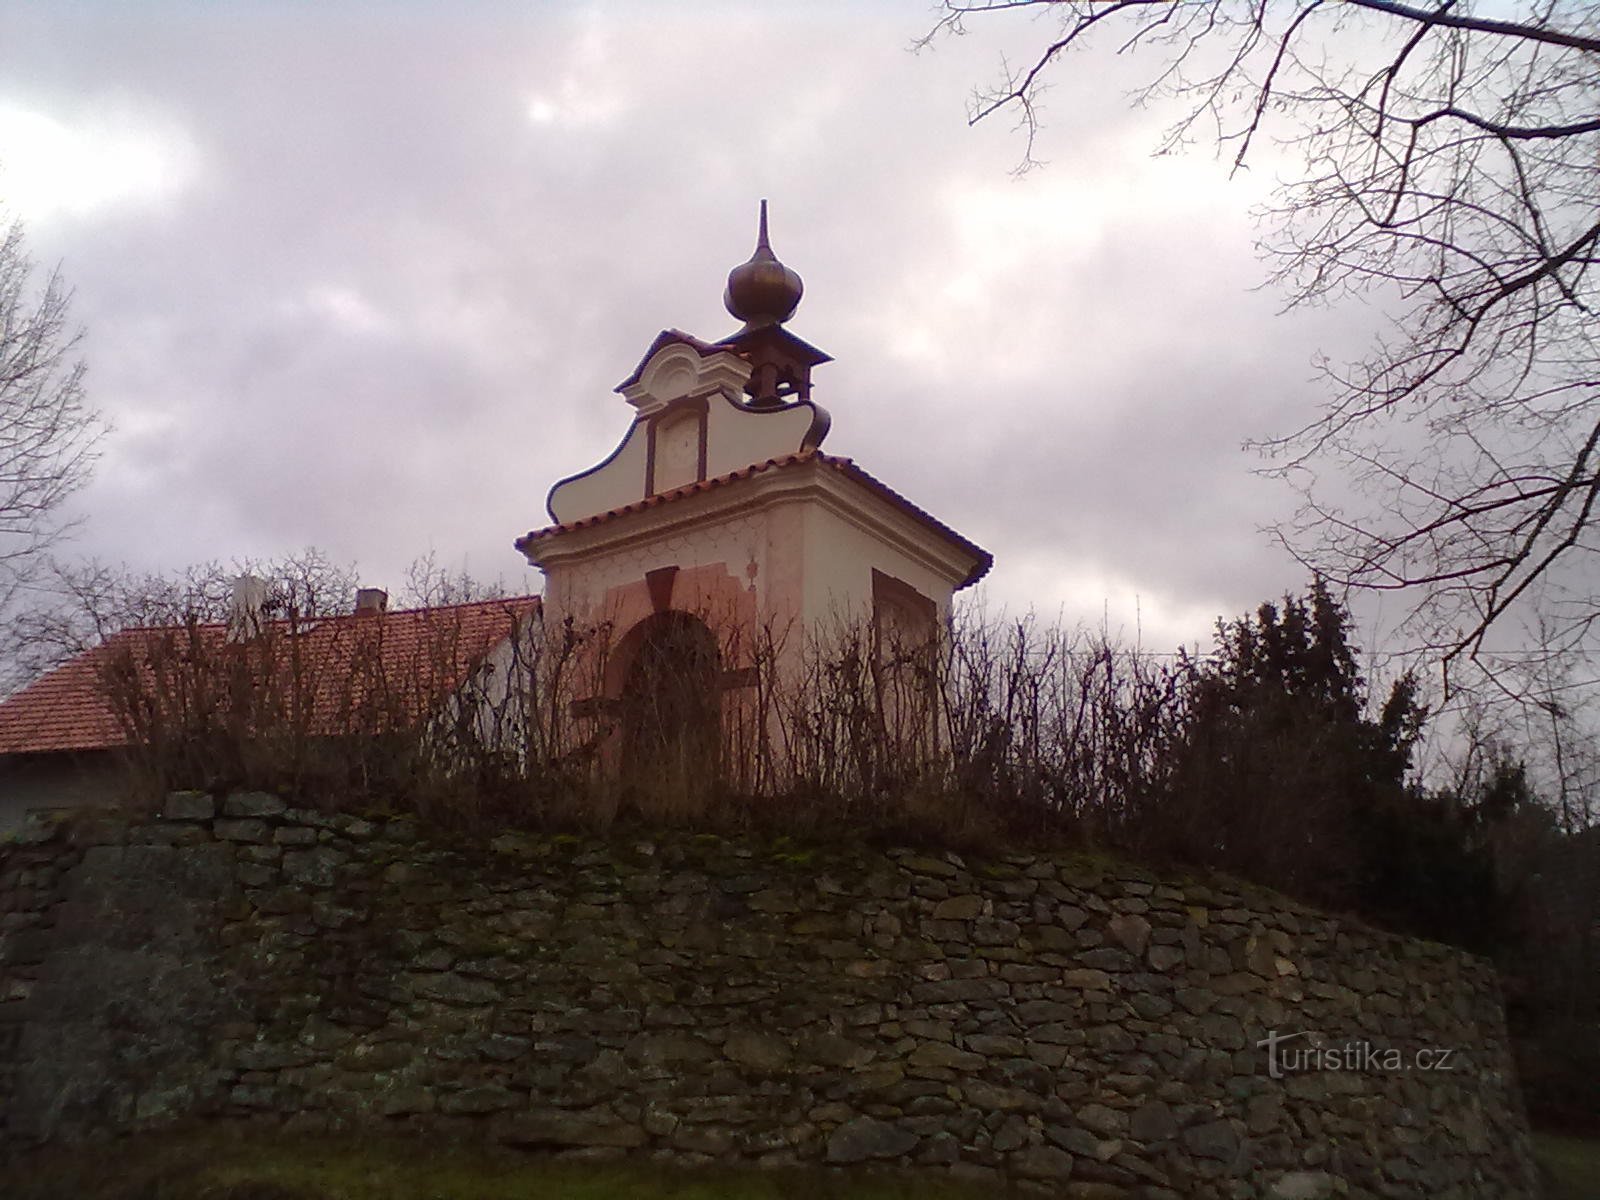 The beginning and the end of the journey. Chapel in Jetřichovice.